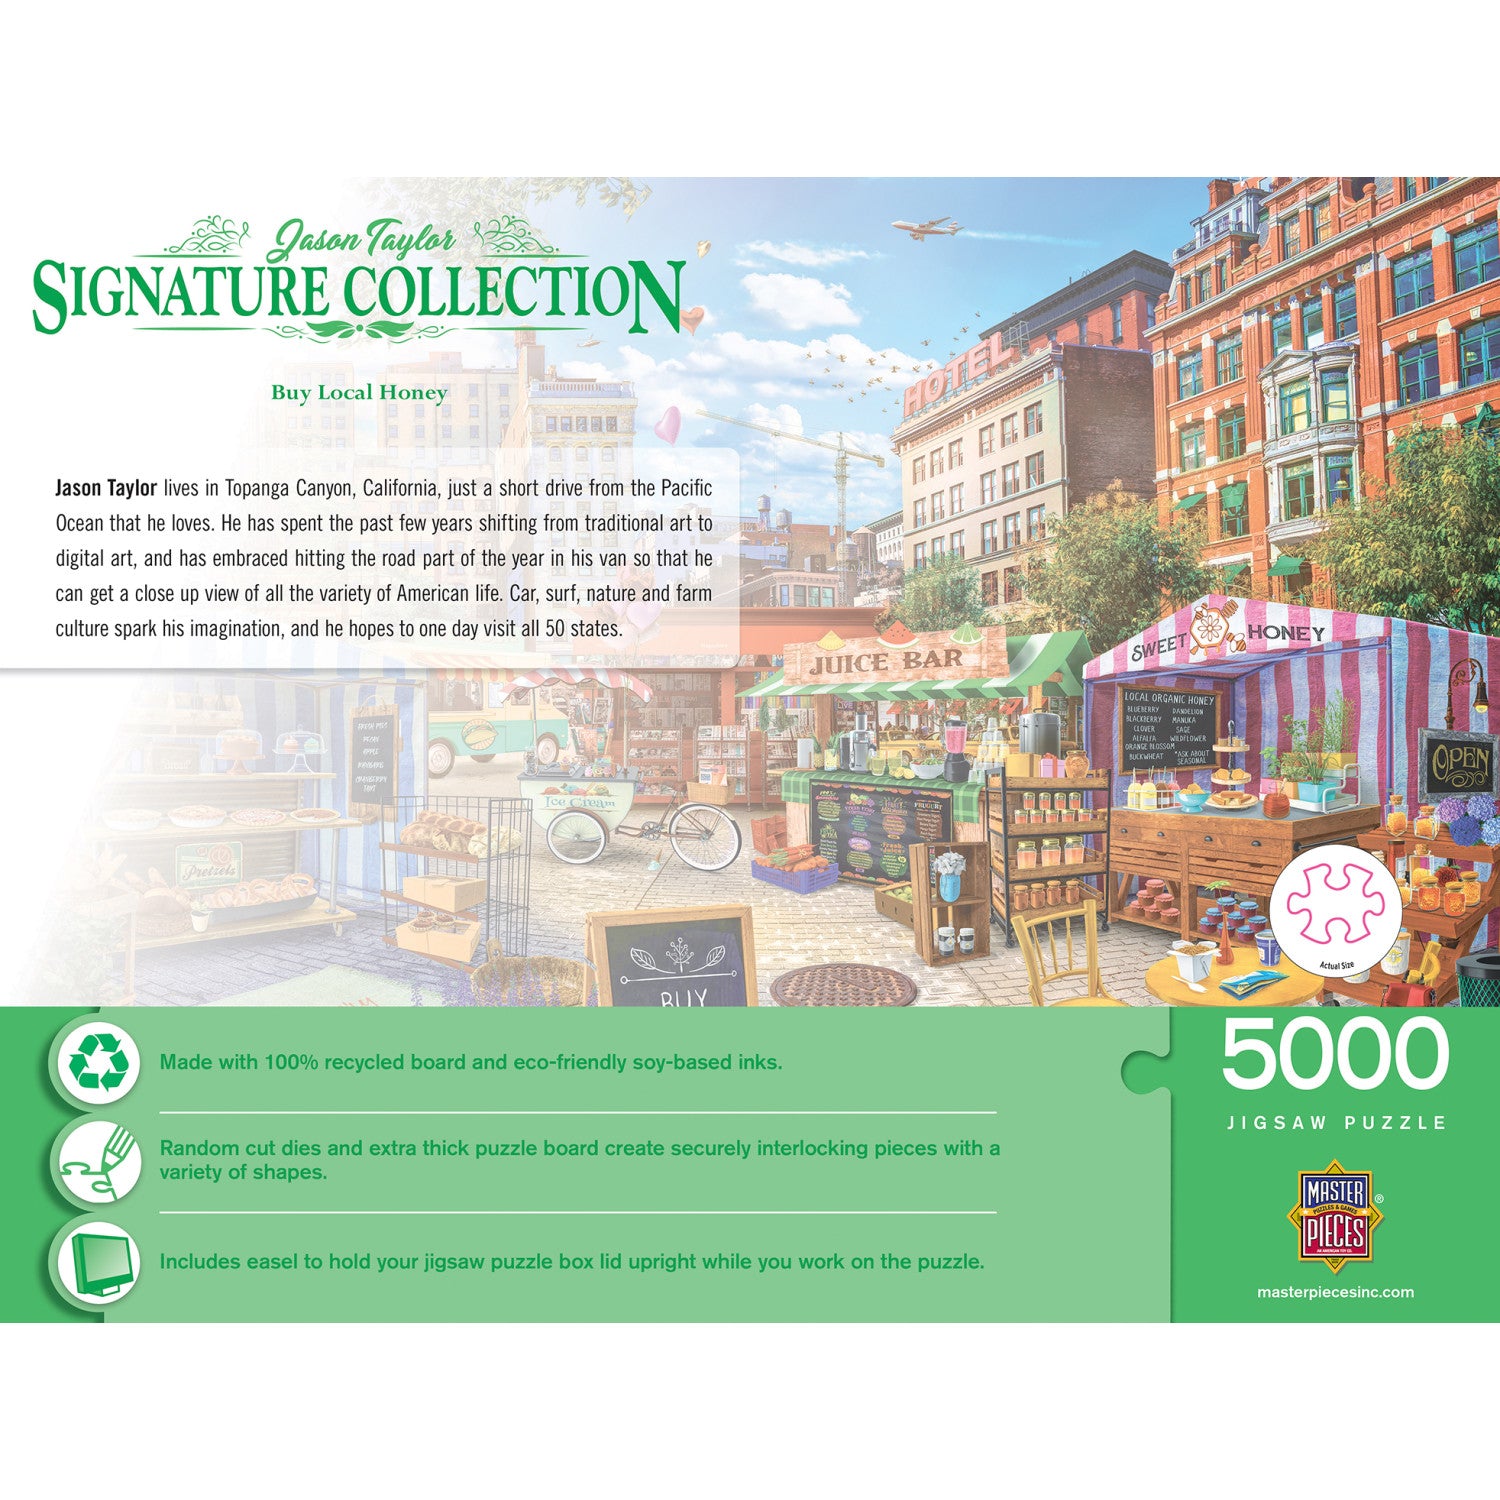 Signature Collection - Buy Local Honey 5000 Piece Jigsaw Puzzle